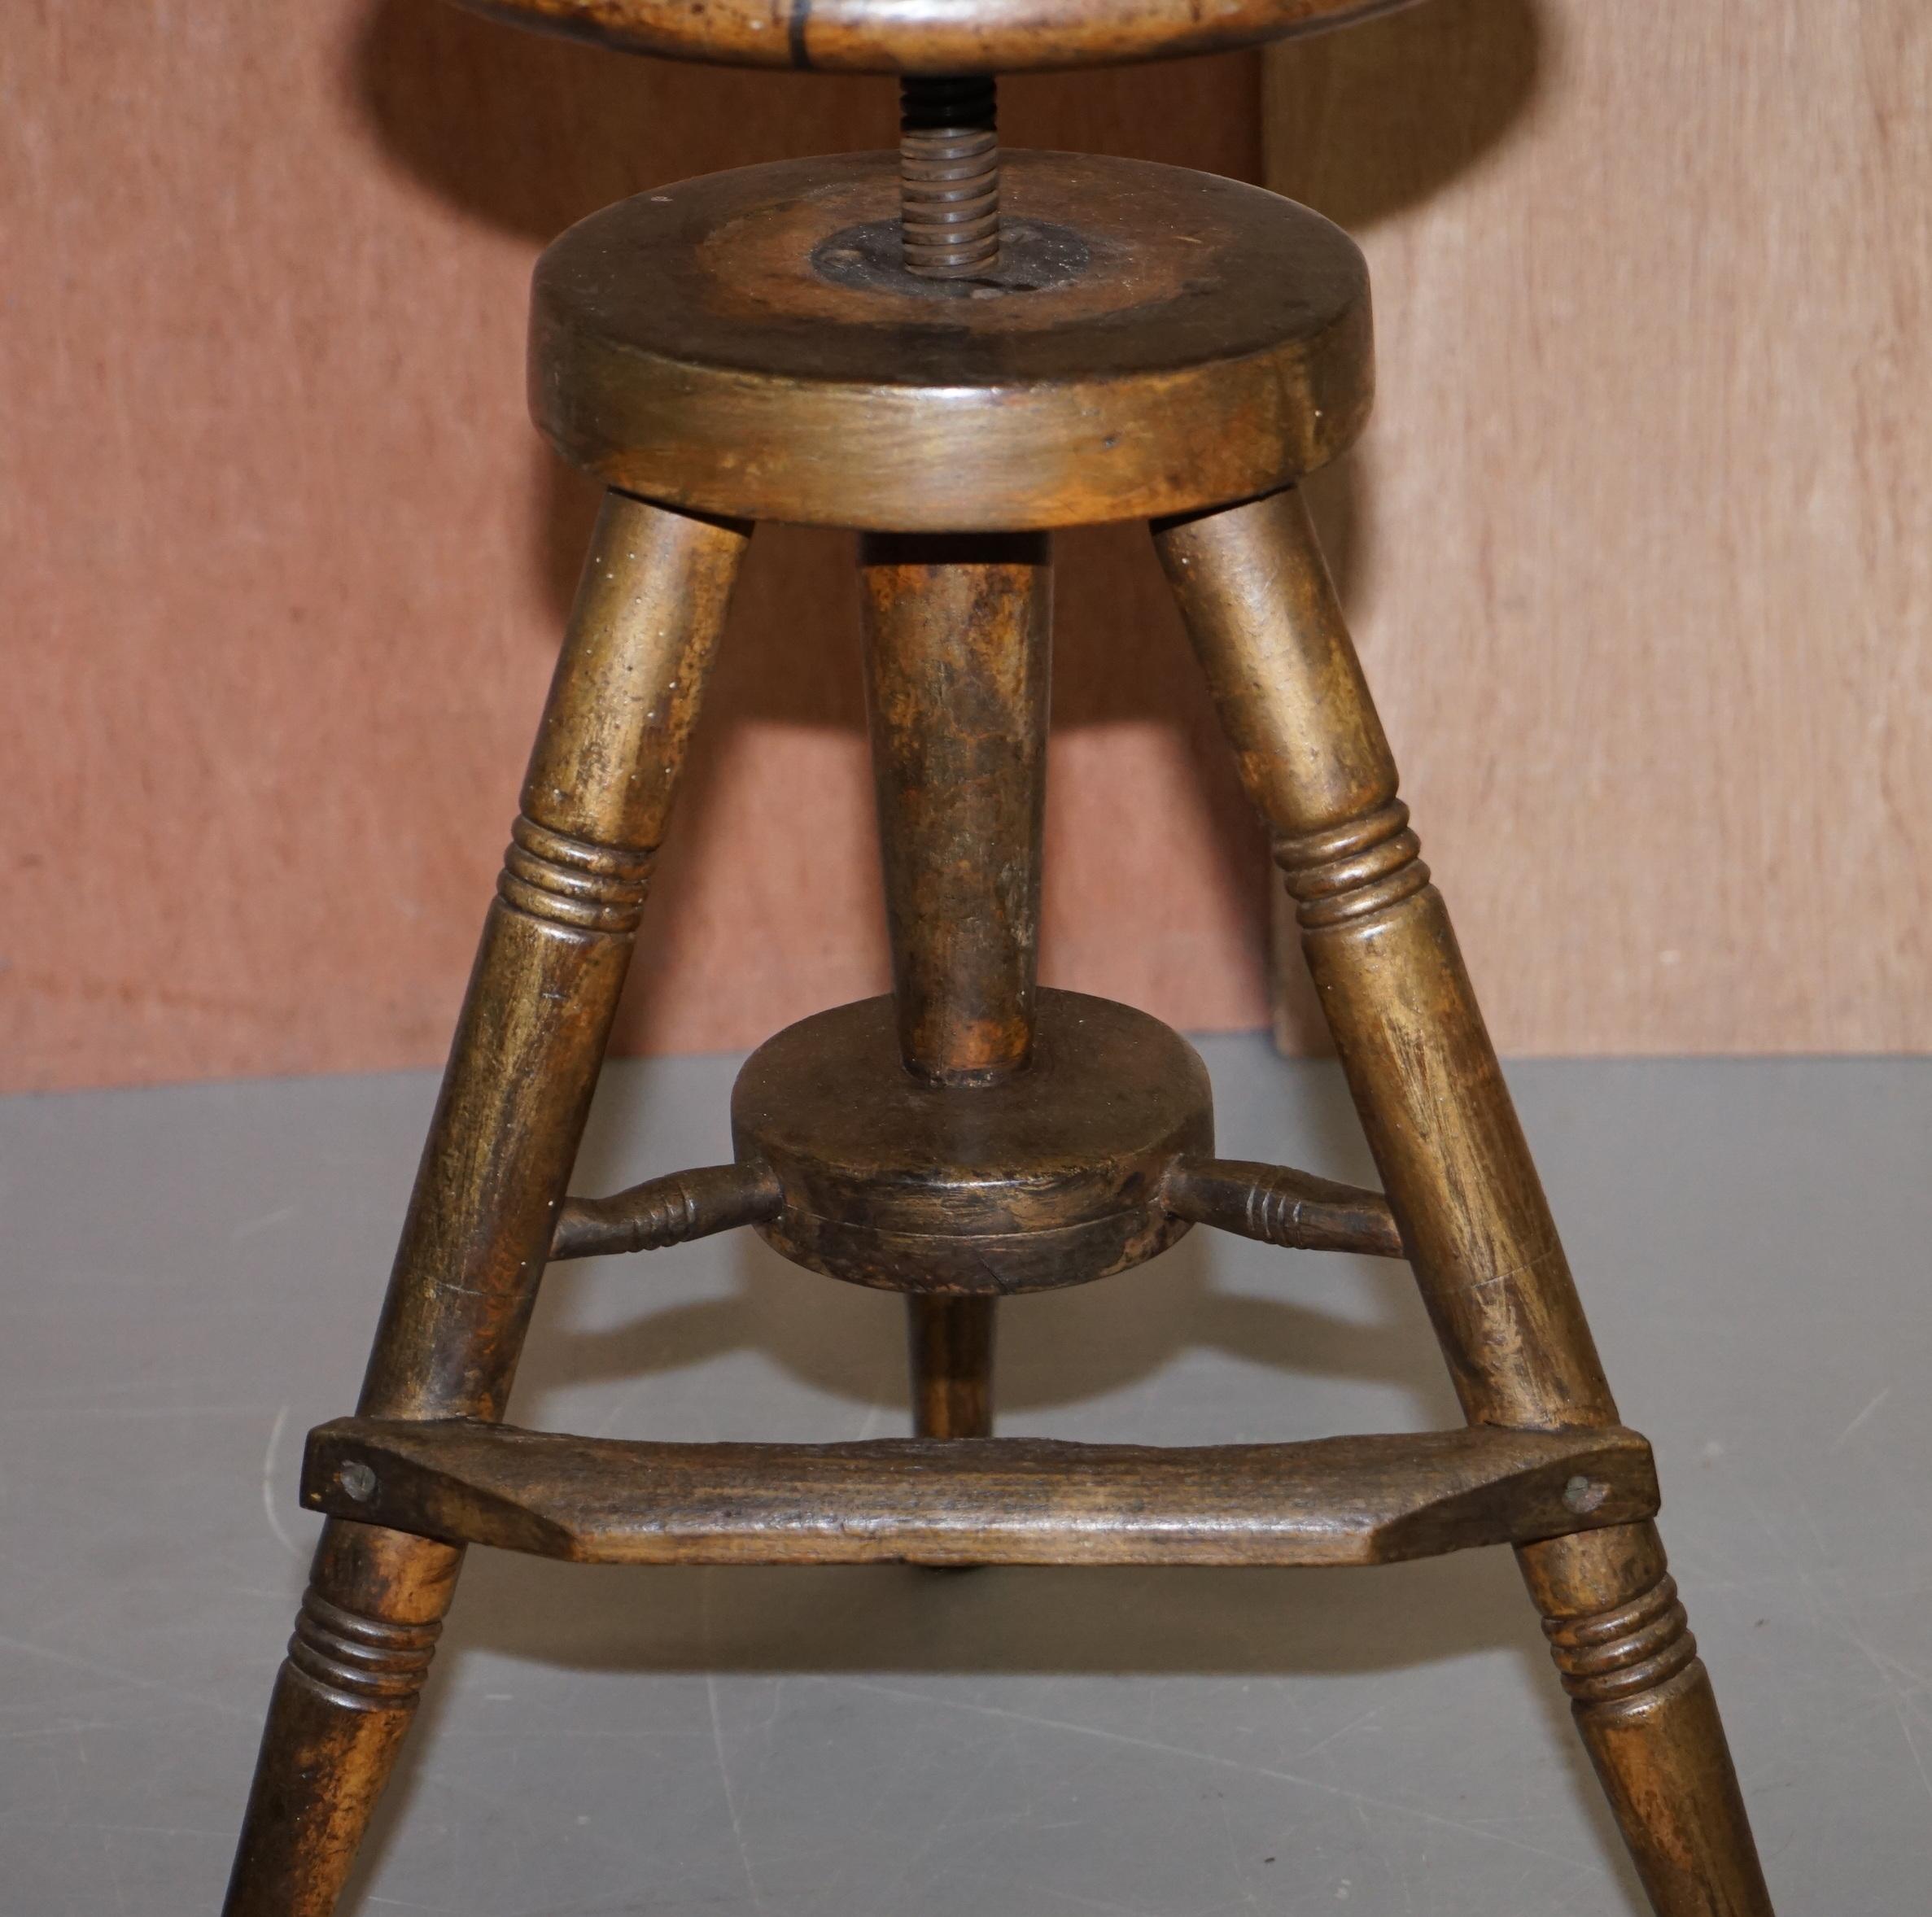 Victorian Early 19th Century Walnut Antique Architects Artists Stool Height Adjustable